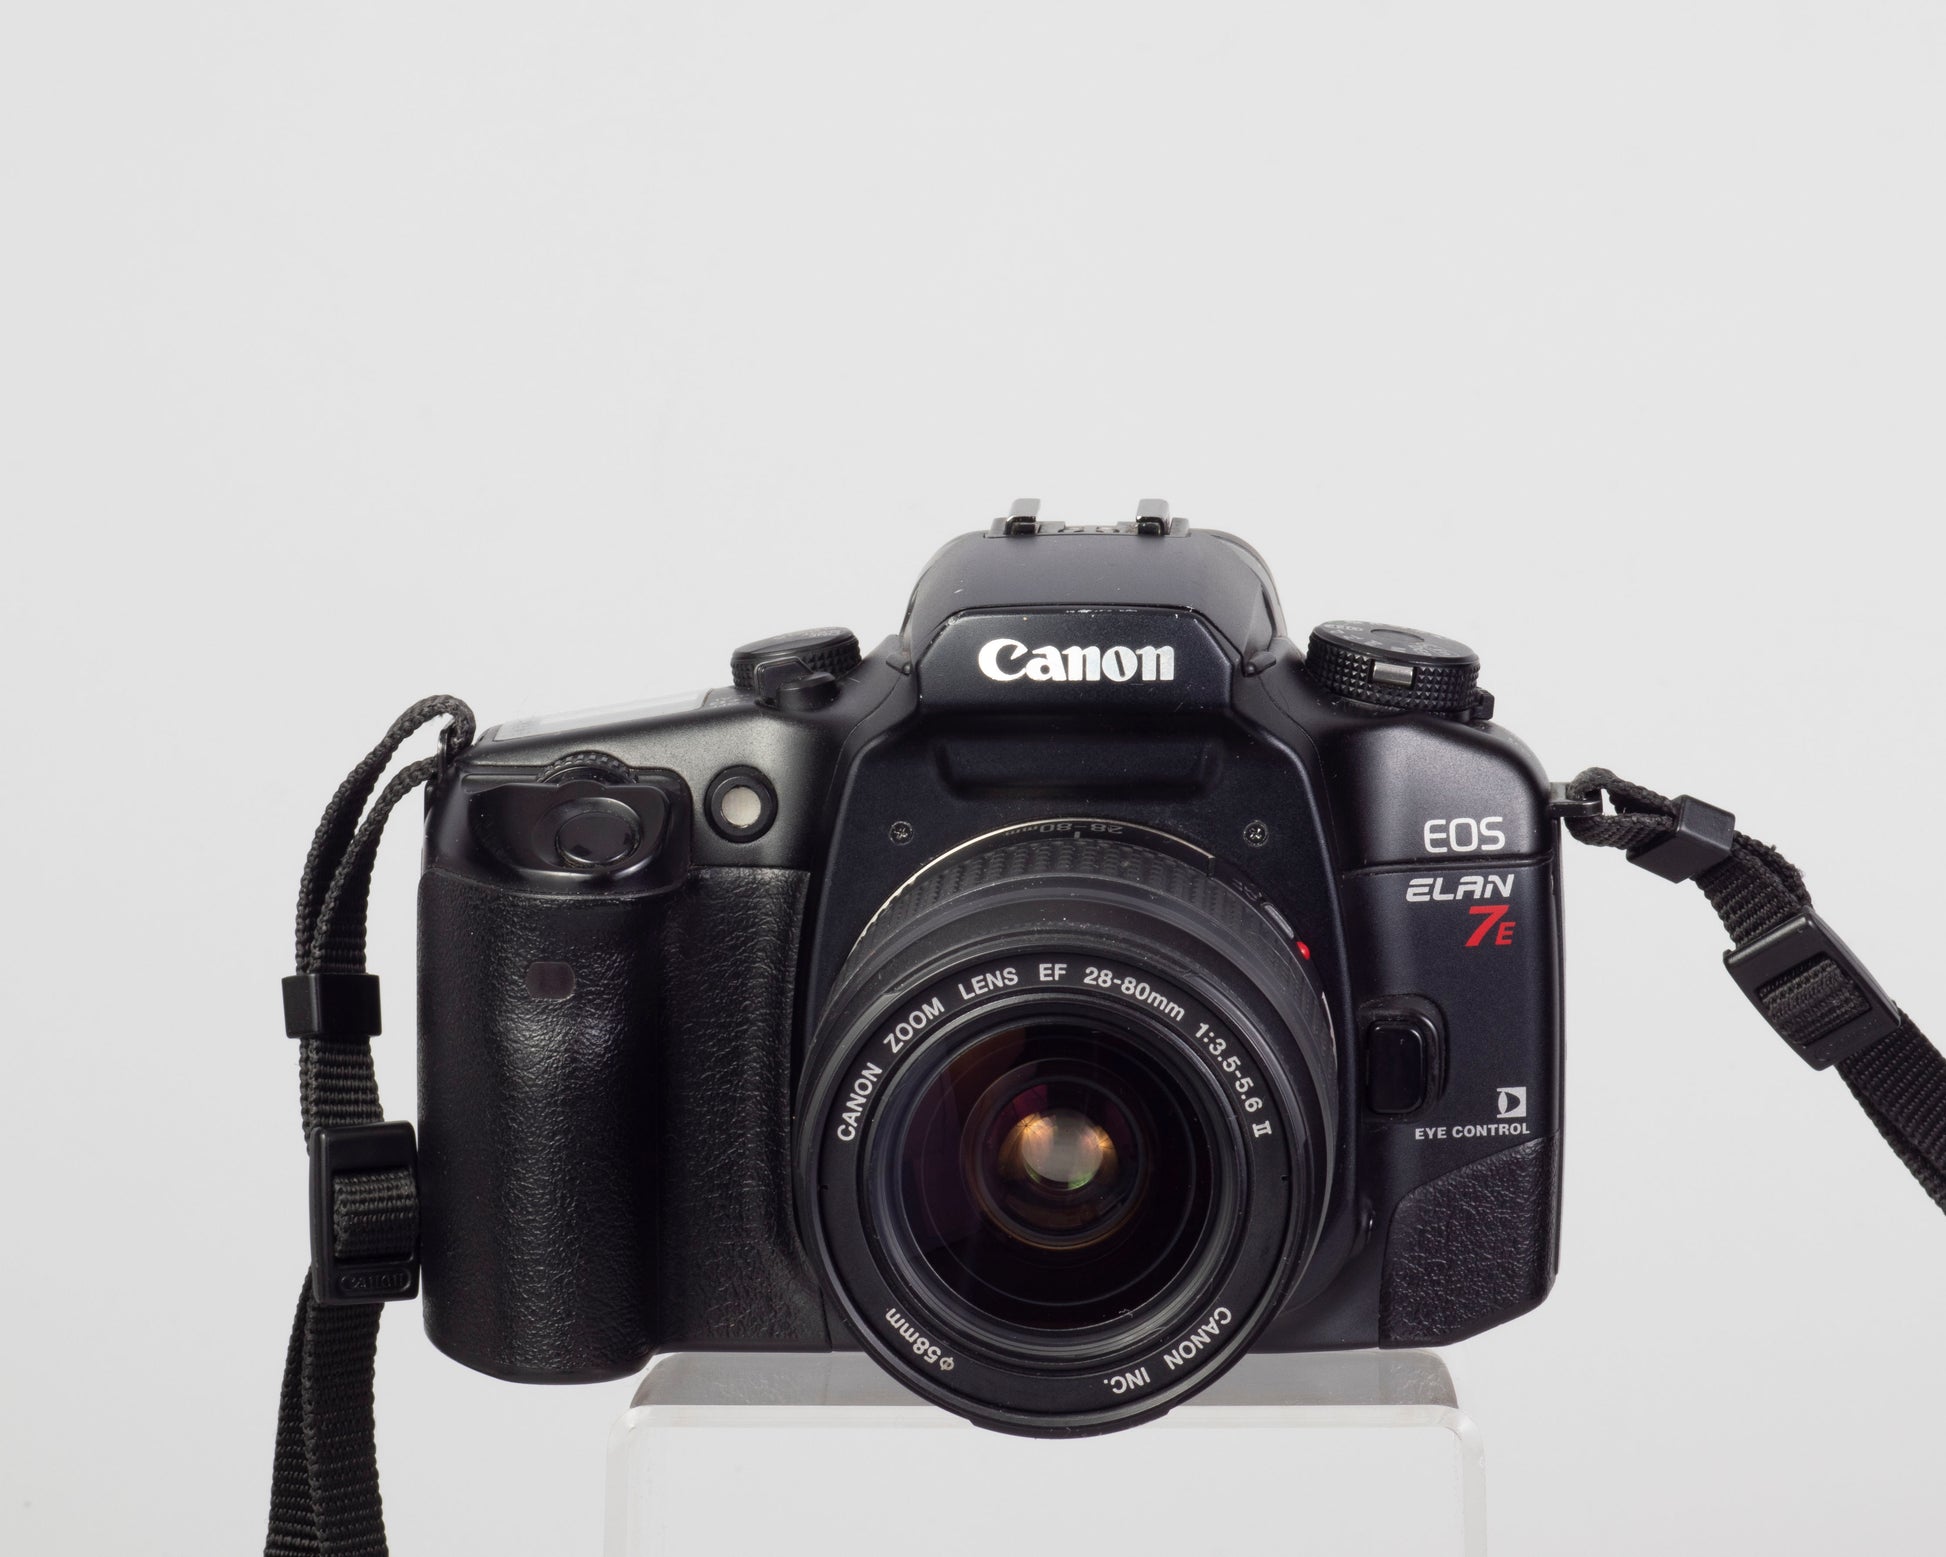 The Canon EOS Elan 7E is a prosumer 35mm SLR from the year 2000 